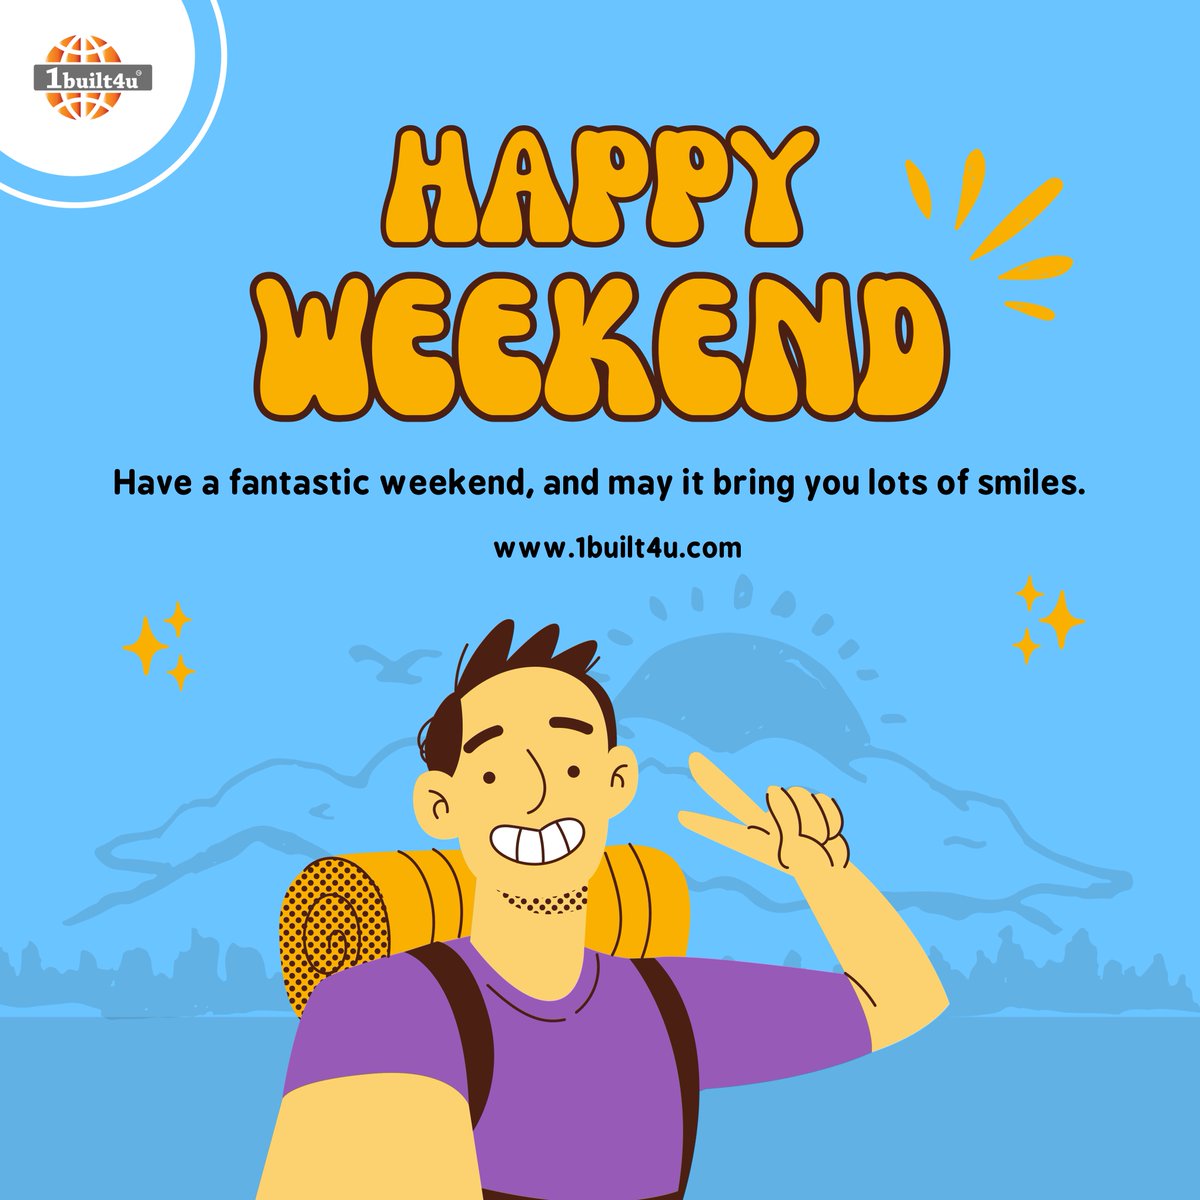 The weekend is here, and so is the adventure.

#1built4u
#WeekendVibes
#HappyWeekend
#WeekendMood
#WeekendGetaway
#WeekendFun
#RelaxationTime
#WeekendGoals
#WeekendAdventure
#WeekendEscape
#ChillTime
#FamilyWeekend
#FriendsAndFun